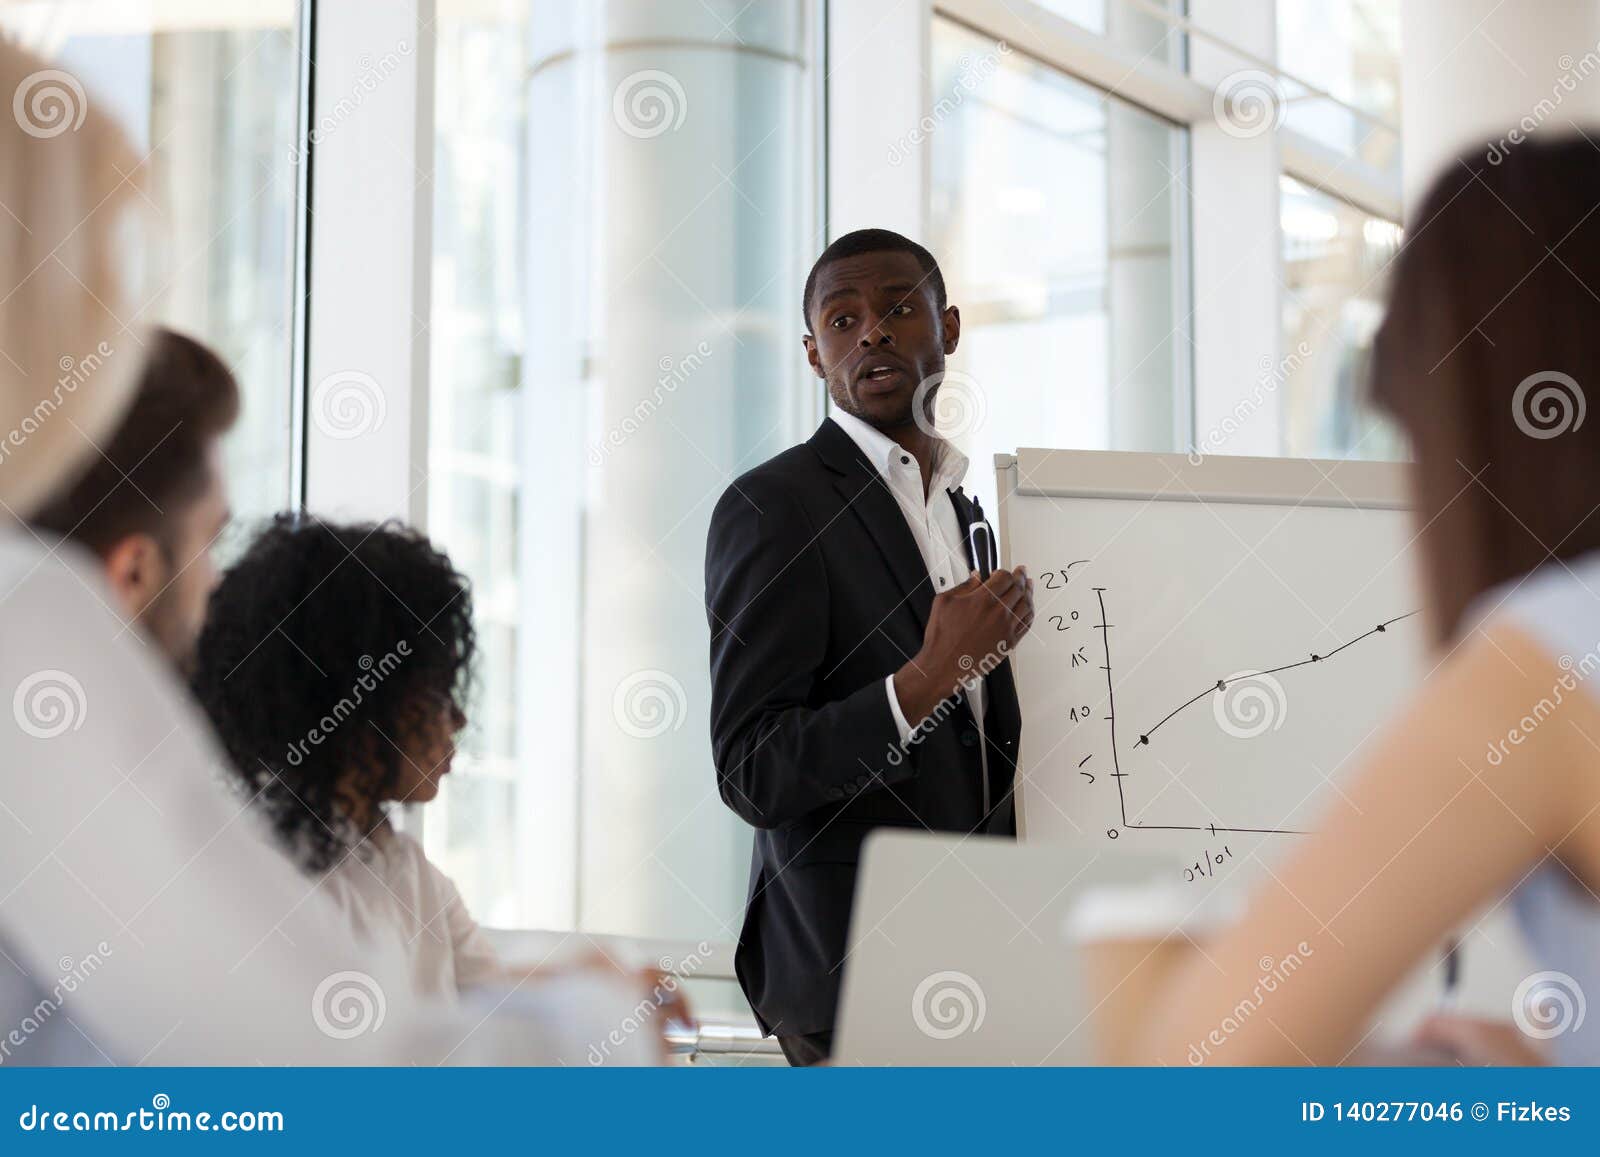 Black Team Leader Presenting To Colleagues A Business Plan Stock